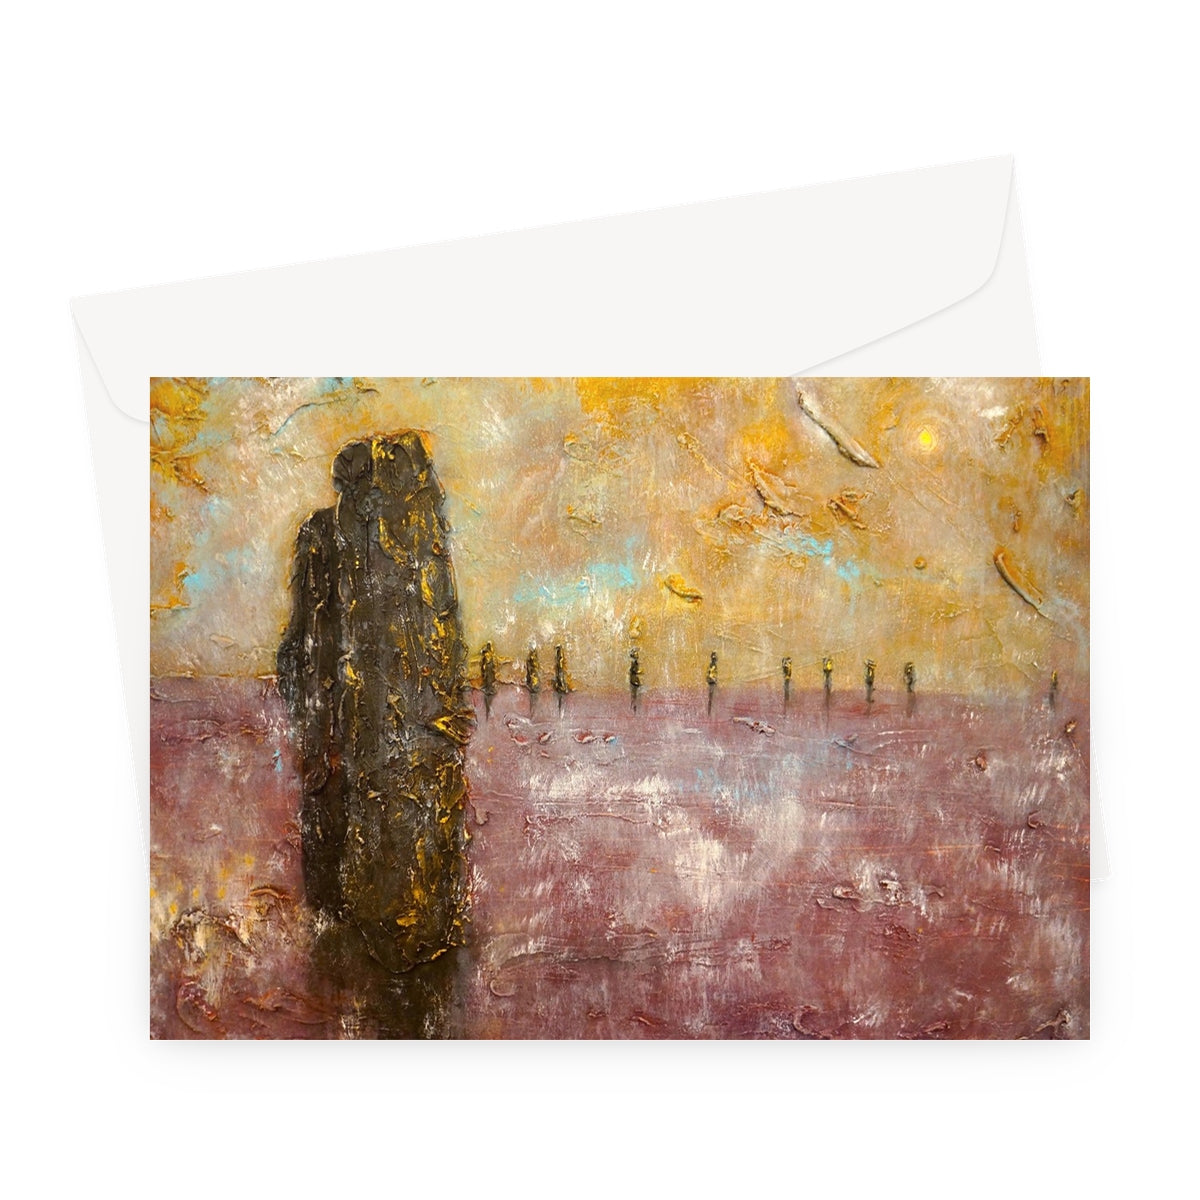 Brodgar Mist Orkney Art Gifts Greeting Card-Greetings Cards-Orkney Art Gallery-A5 Landscape-1 Card-Paintings, Prints, Homeware, Art Gifts From Scotland By Scottish Artist Kevin Hunter